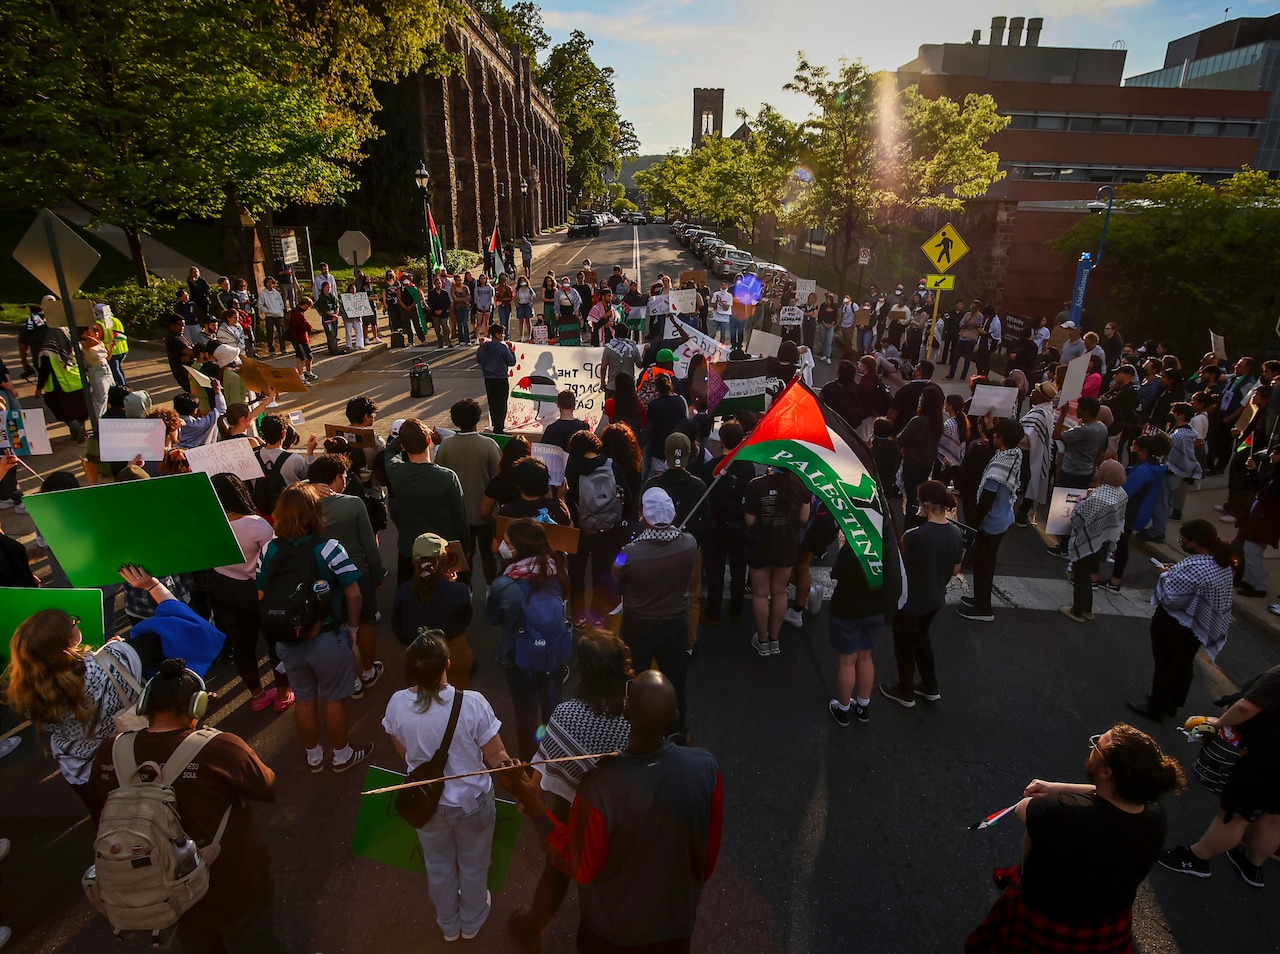 Hundreds rally at Lehigh amid nationwide campus demands to aid Palestinians (PHOTOS) [Video]